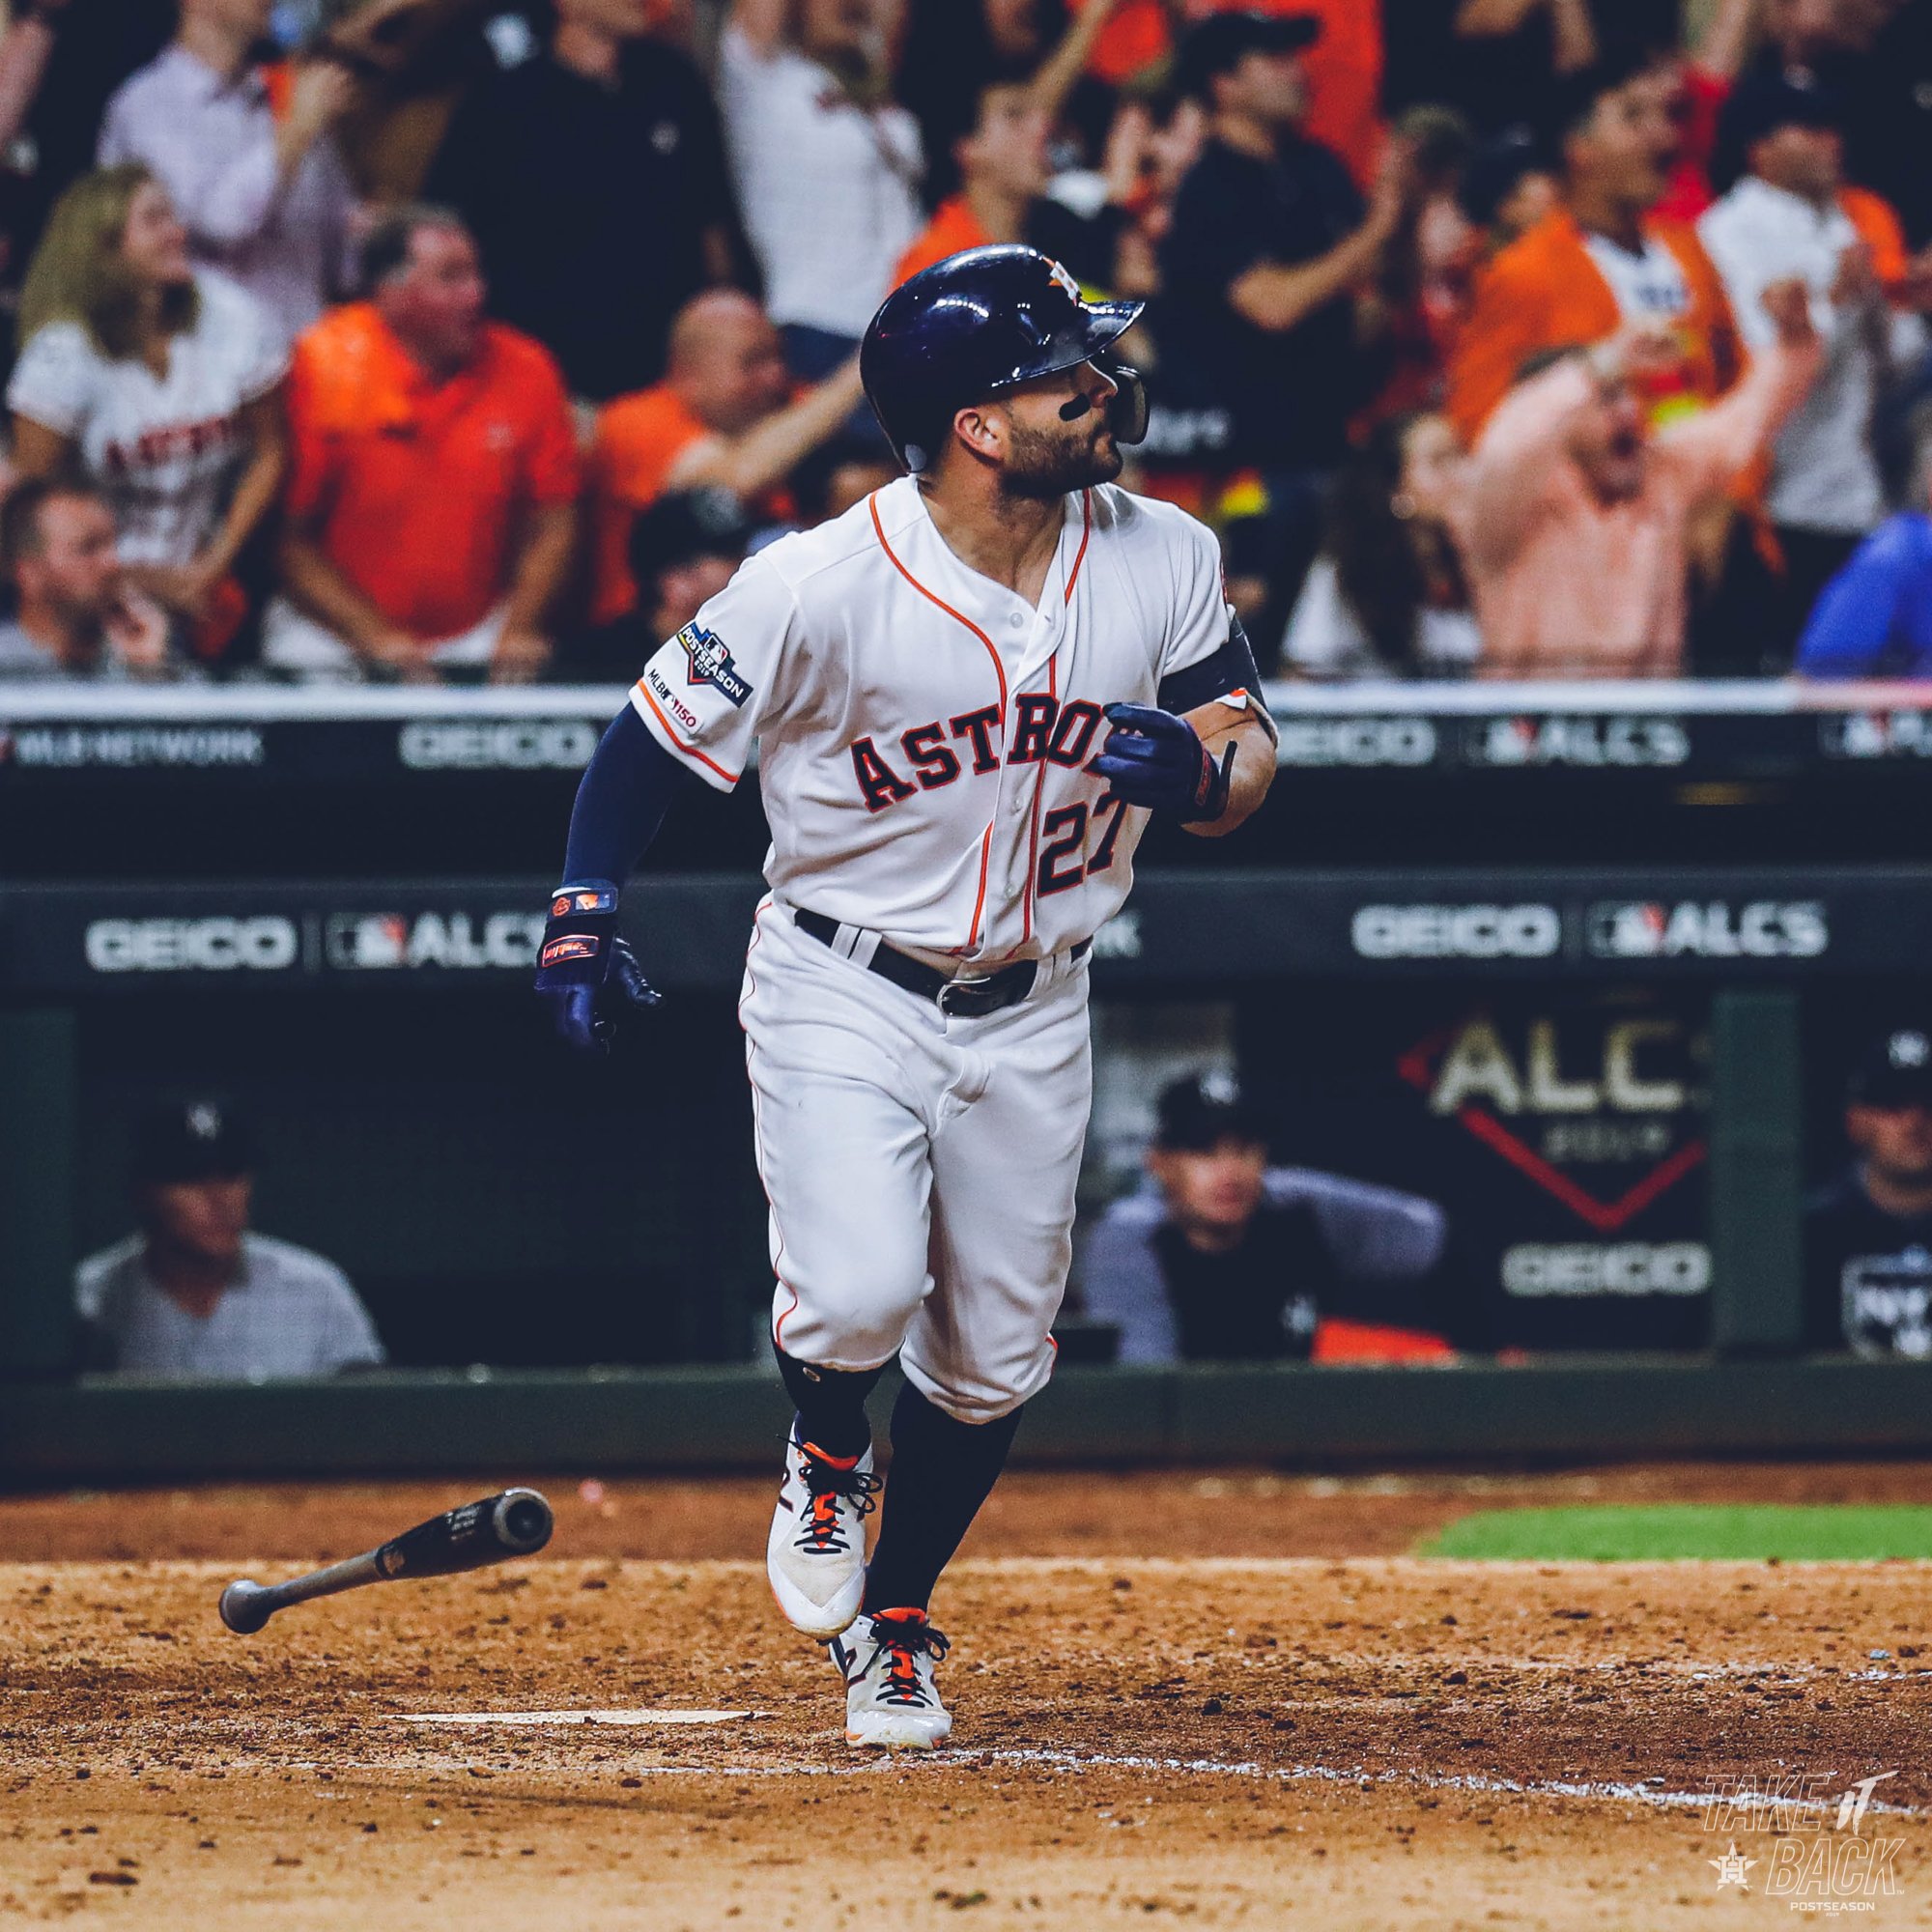 Houston Astros on X: Small steps and giant leaps. #SpaceCity   / X